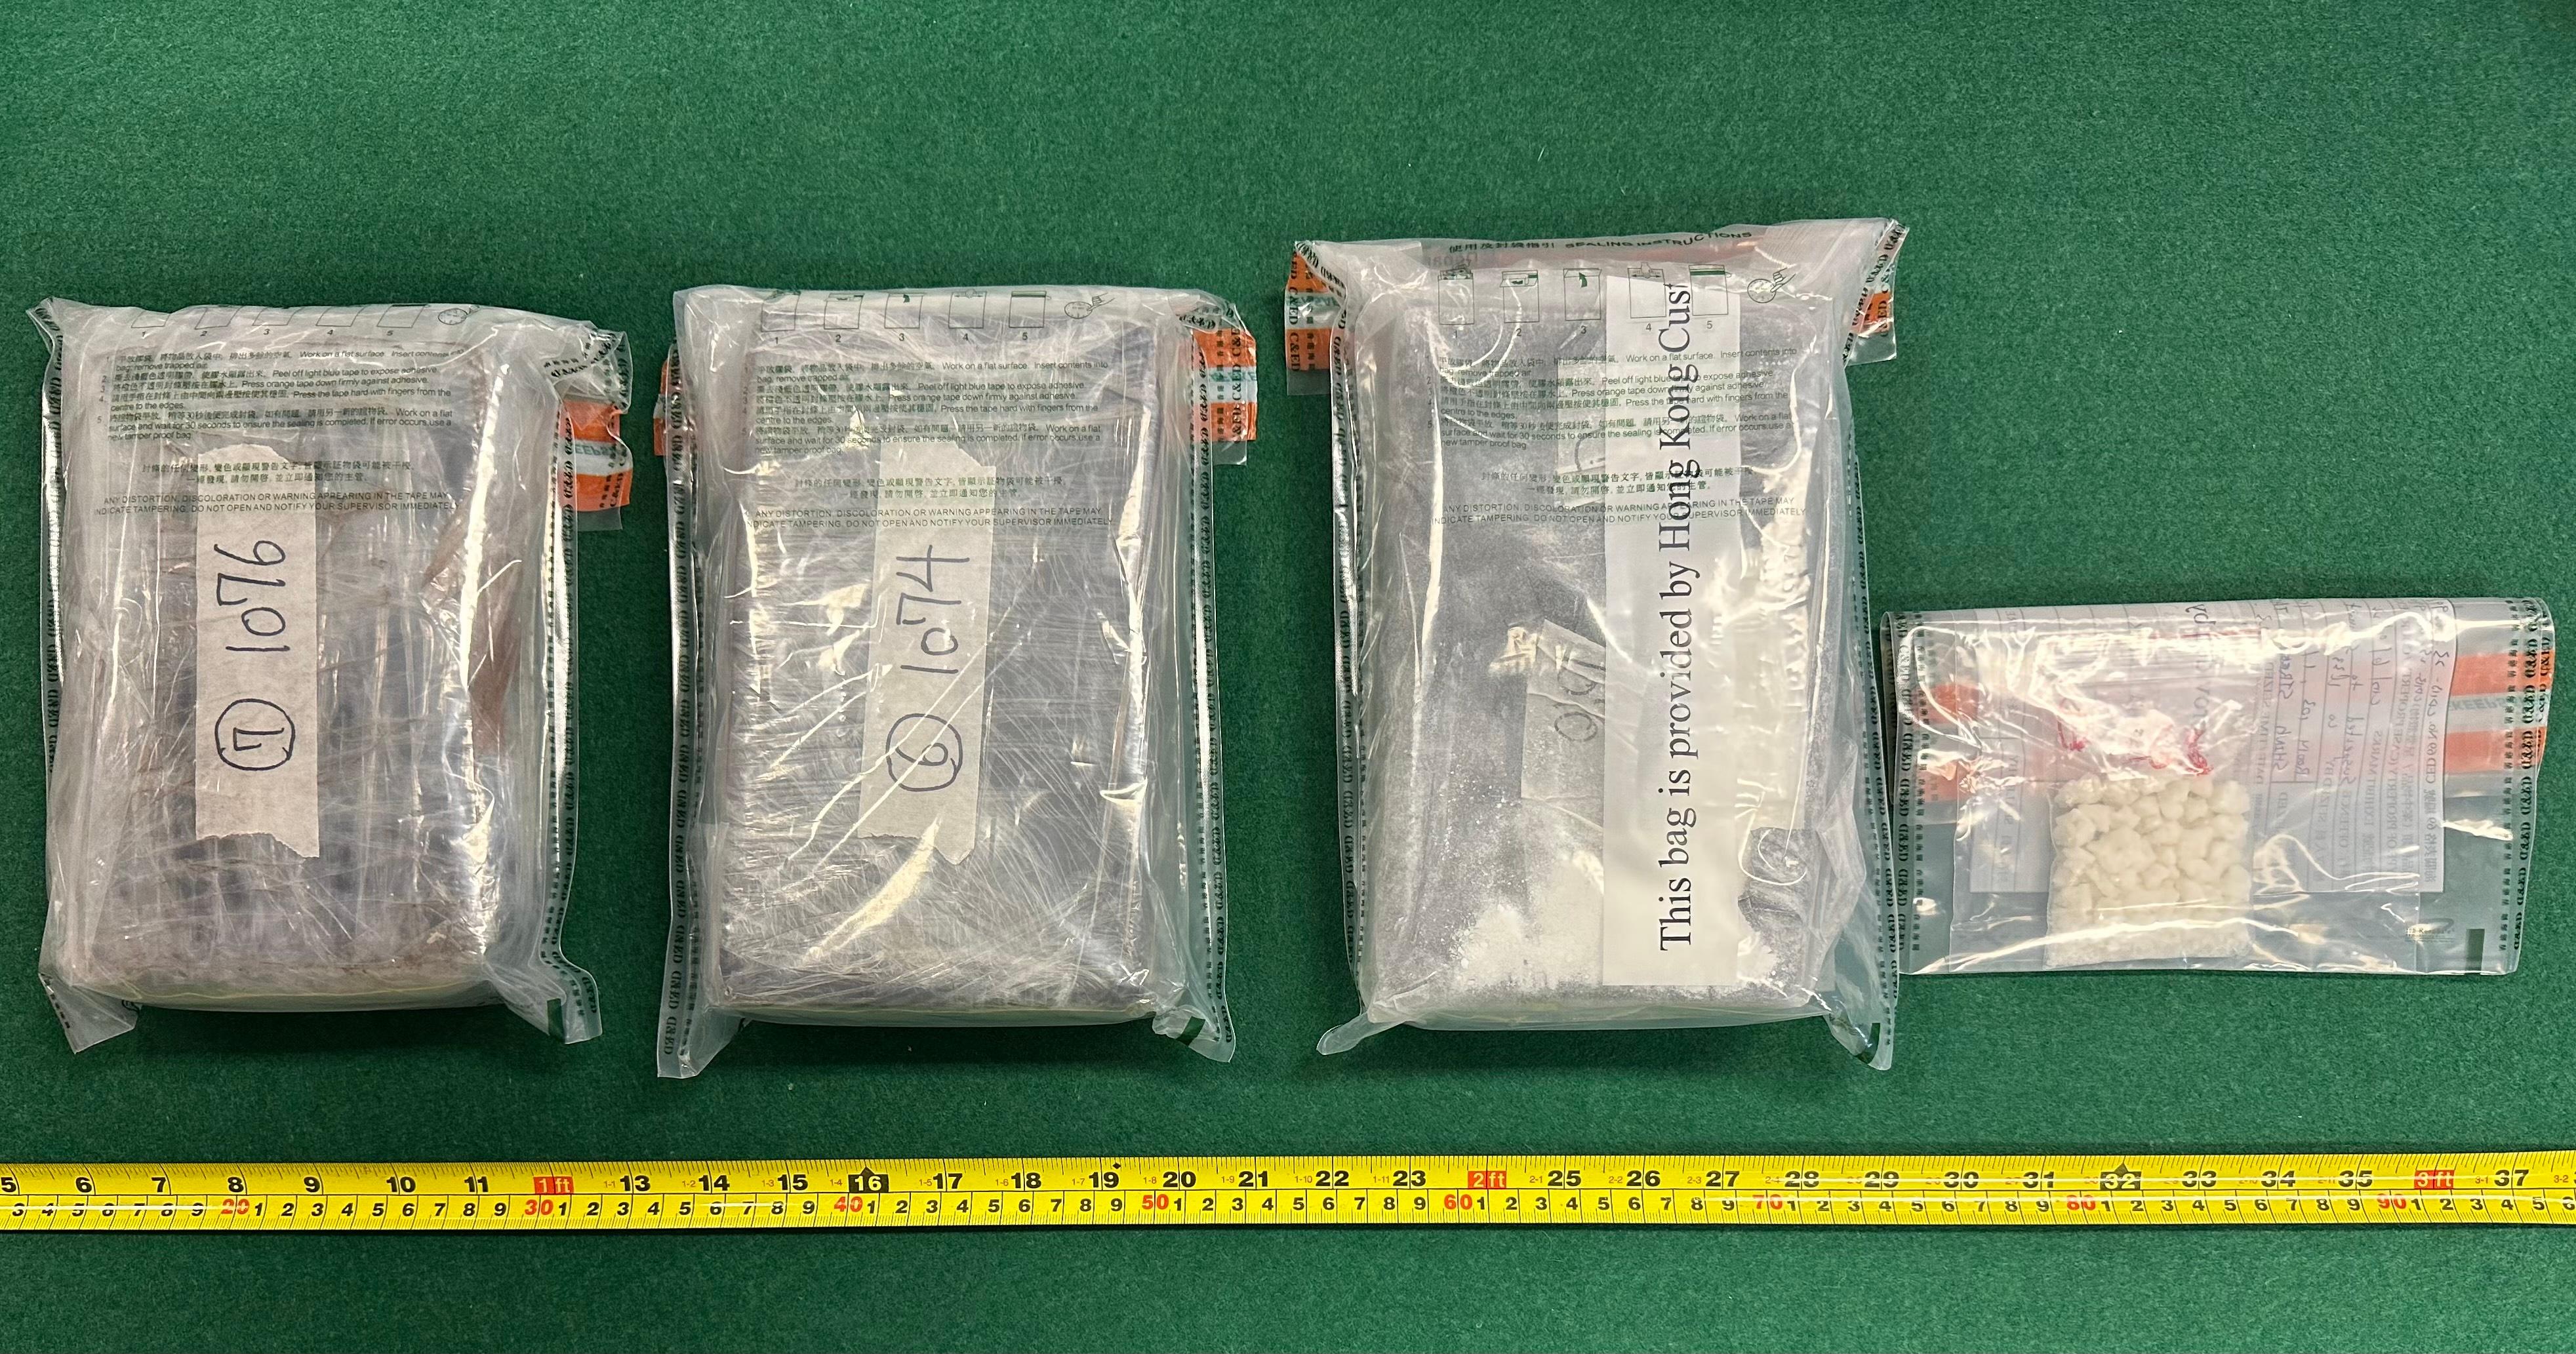 Hong Kong Customs seized about 3 kilograms of suspected cocaine and about 26 grams of suspected crack cocaine with a total estimated market value of about $3.3 million in Tai Koo on May 23. Photo shows the suspected cocaine and suspected crack cocaine seized.